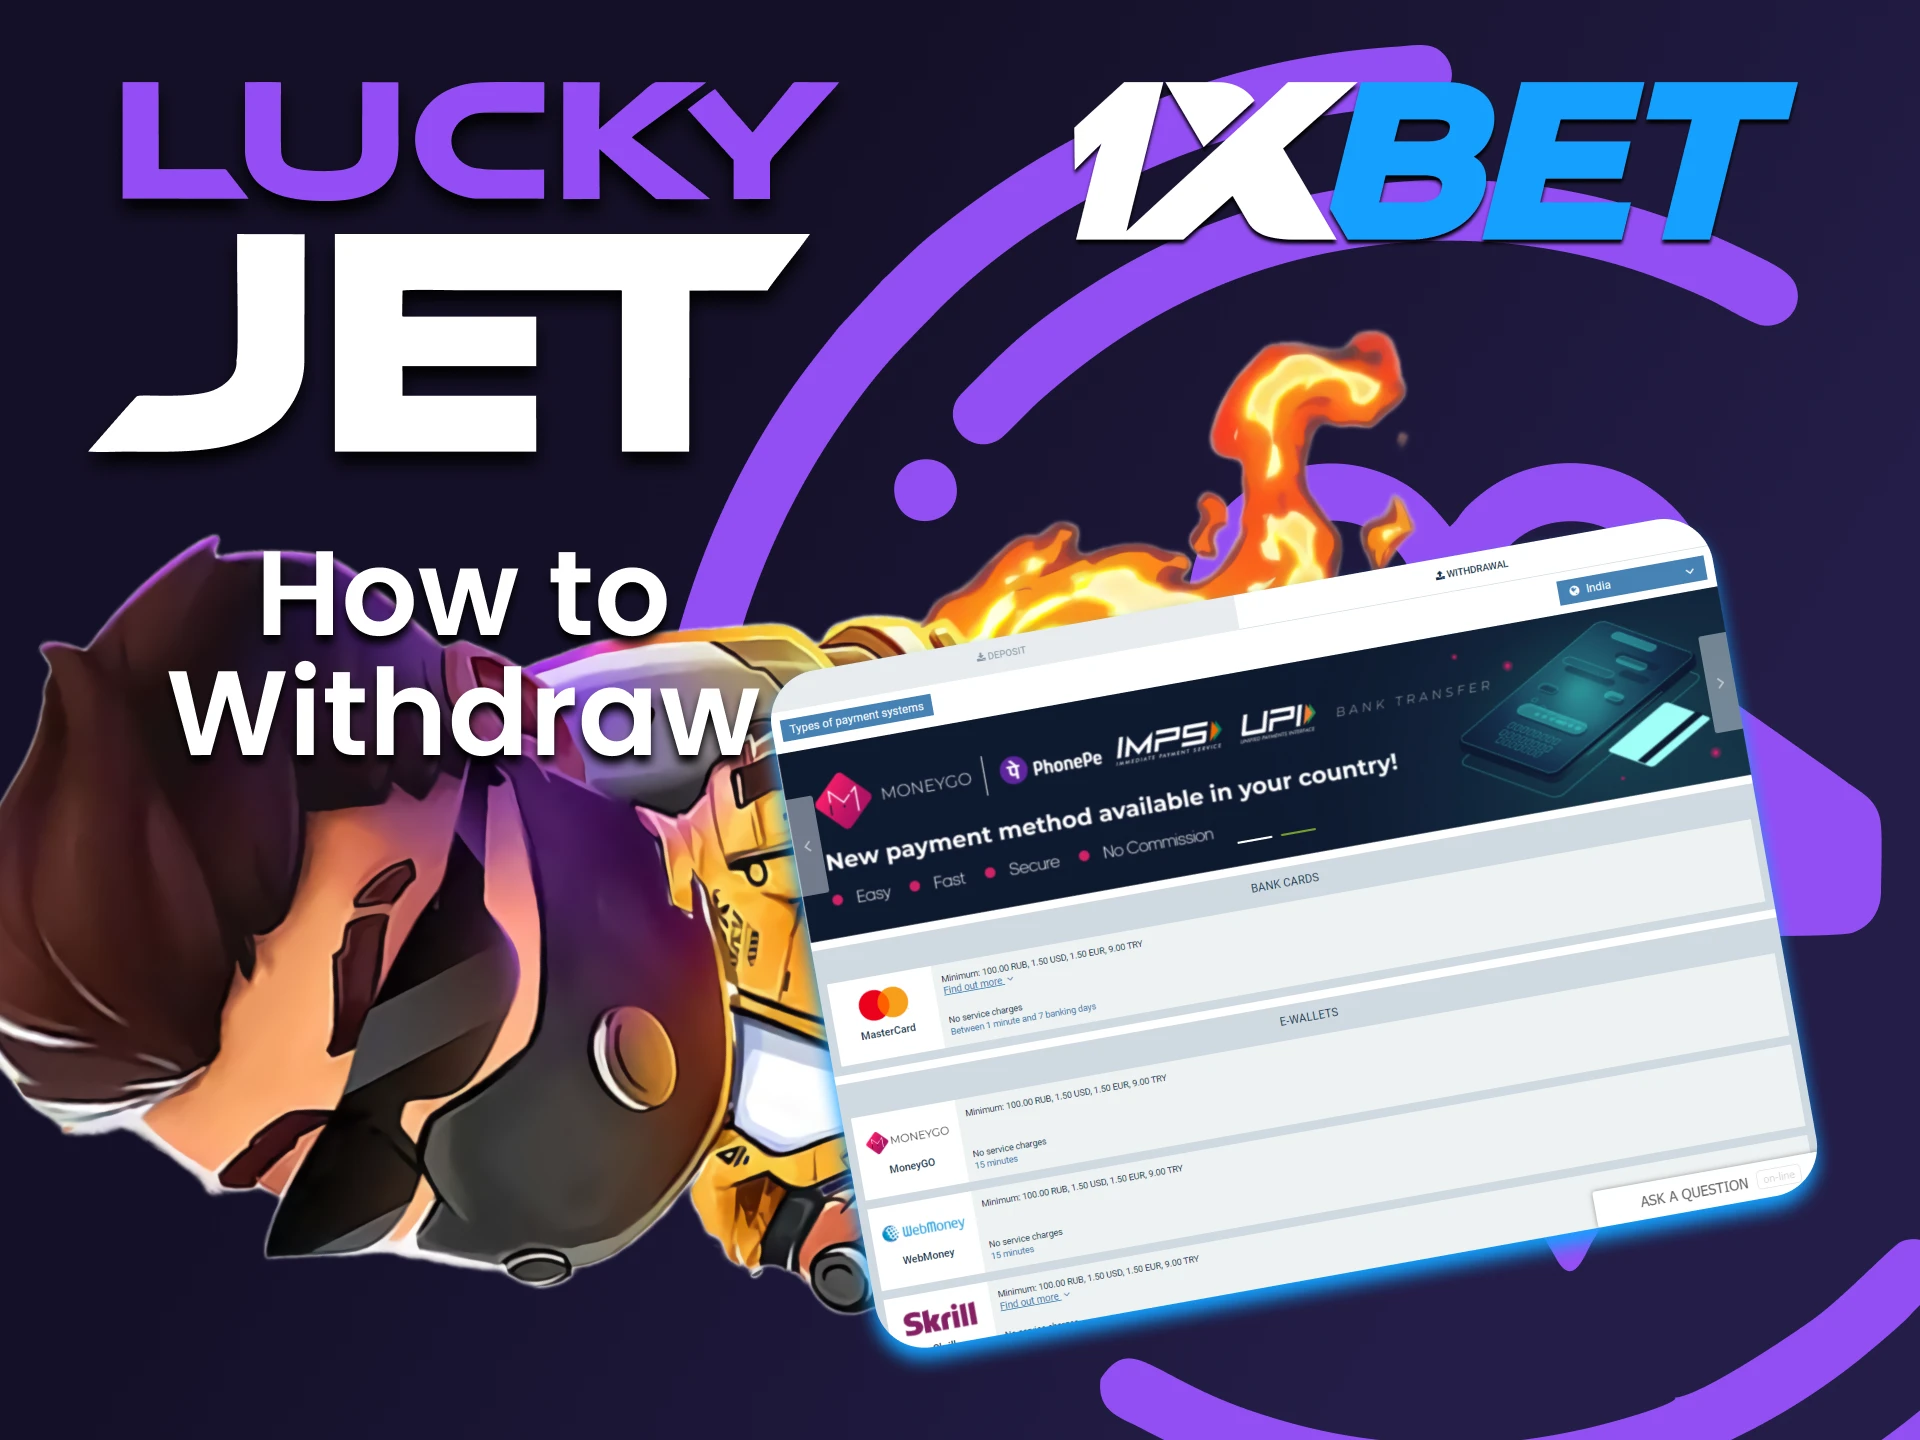 Withdraw funds using the provided 1xbet method after winning the Lucky Jet game.